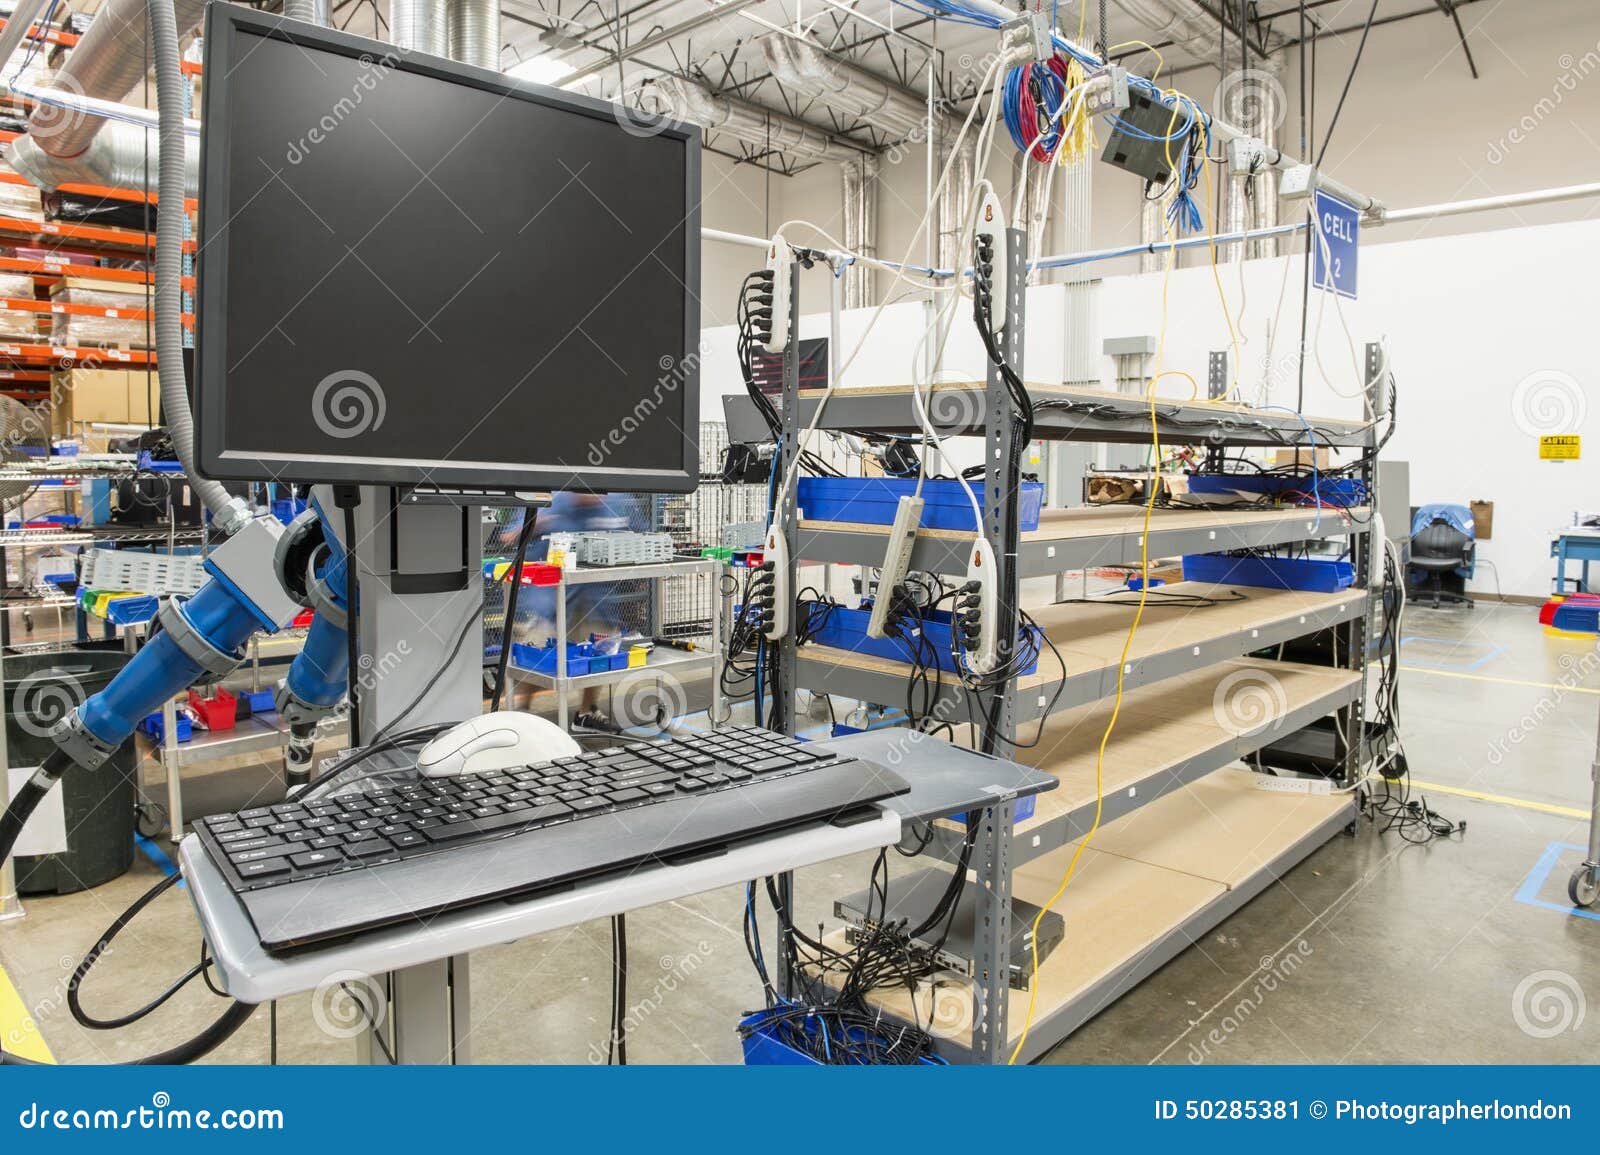 Desktop Computer In Manufacturing Industry Stock Image Image Of Wiring Connection 50285381